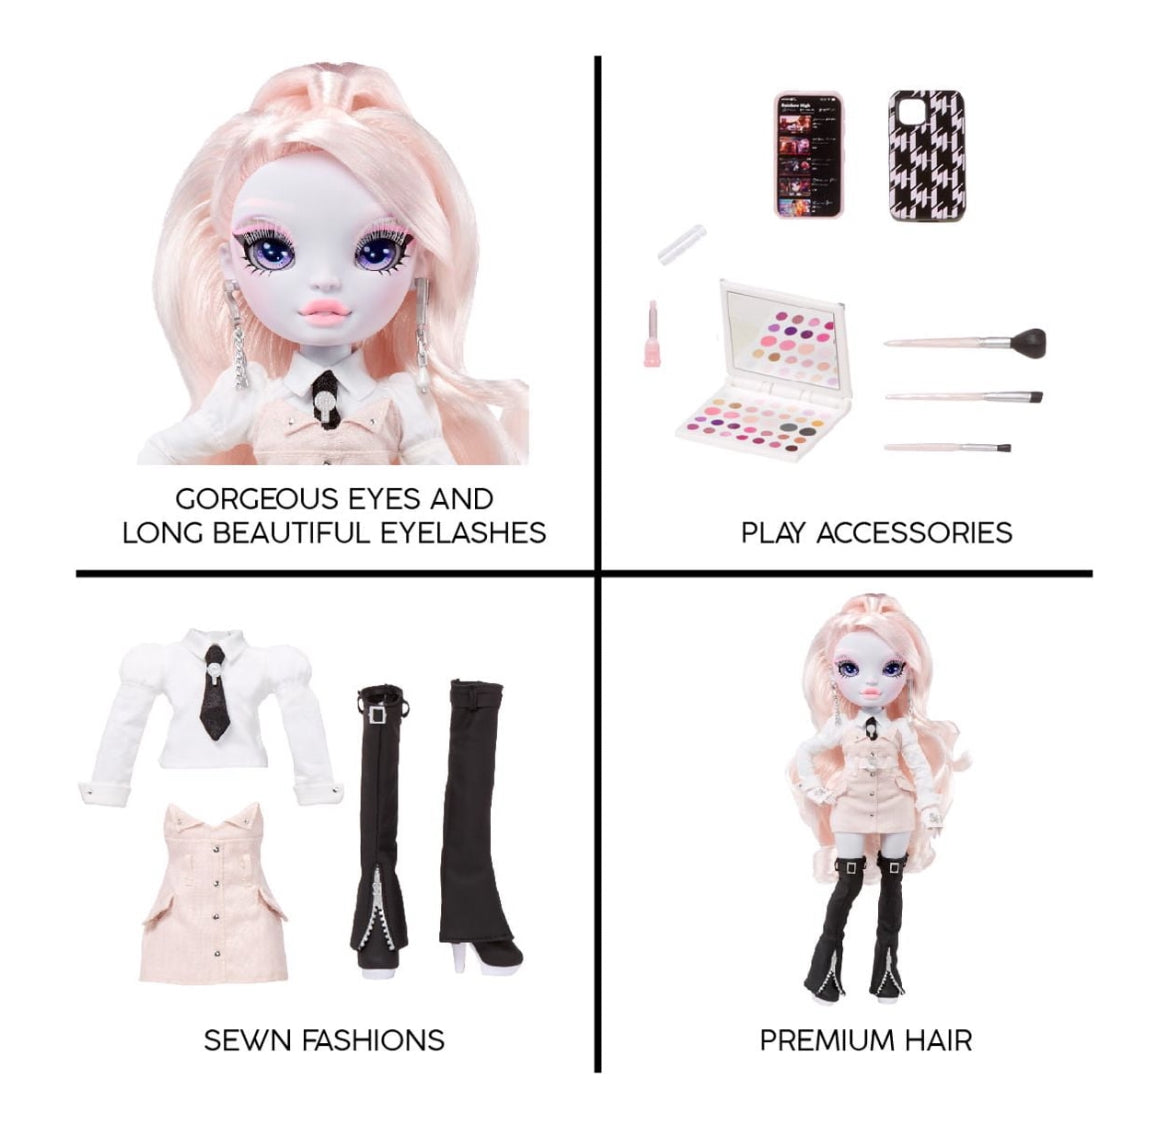 Rainbow High Shadow High Karla Choupette - Pink Fashion Doll. Fashionable Outfit & 10+ Colorful Play Accessories